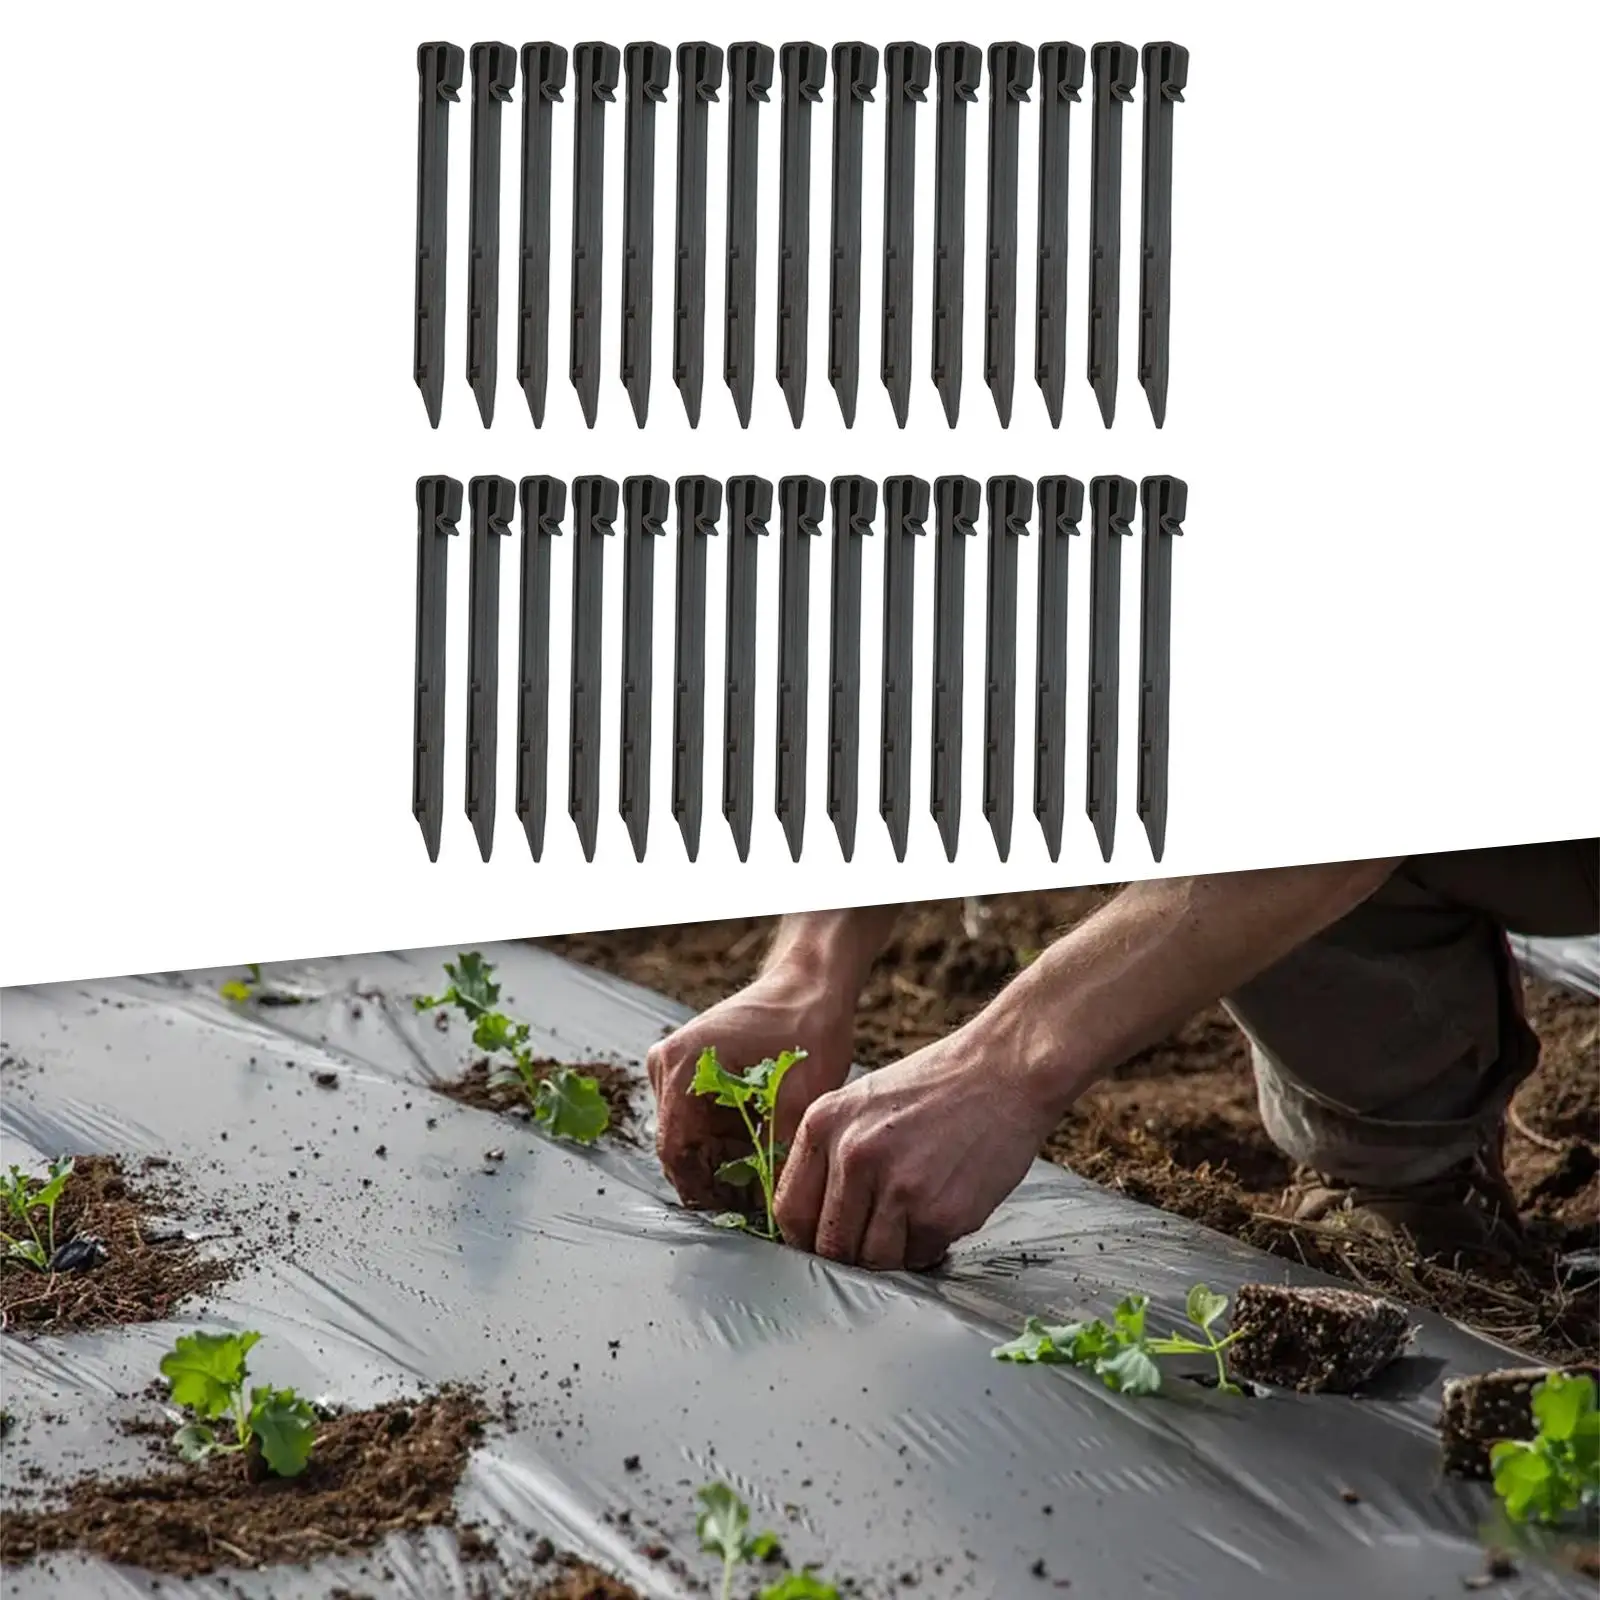 30 Pieces Fruit Tree Branch Spreader Stakes Strong Garden Staples Tent Pegs